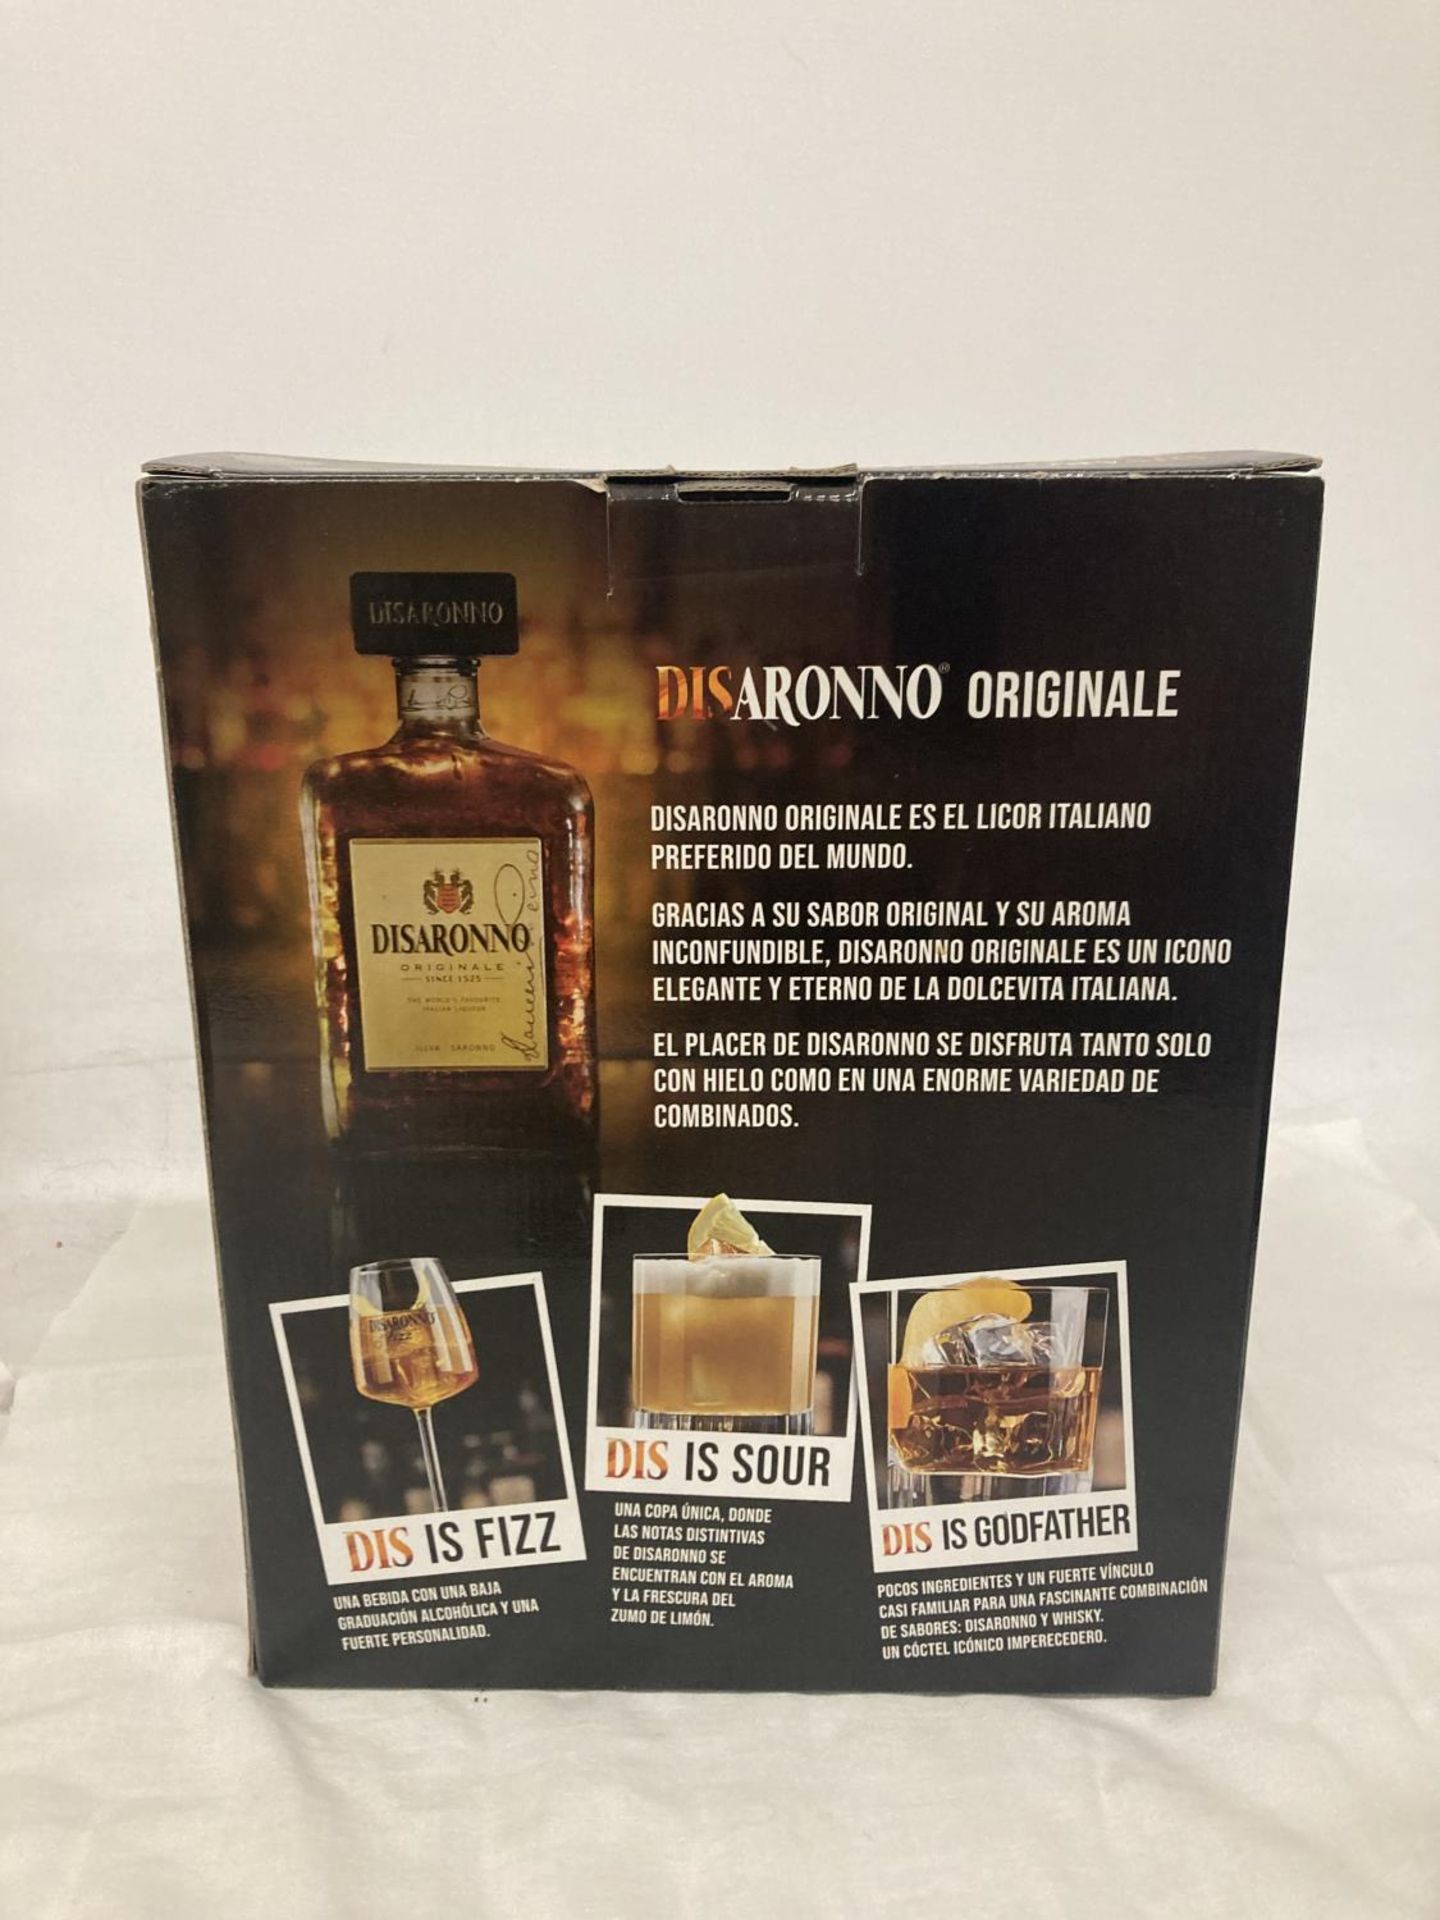 A BOXED DISARONNO GIFT SET WITH 700ML BOTTLE OF DISARONNO AND A BRANDED GLASS - Image 3 of 3